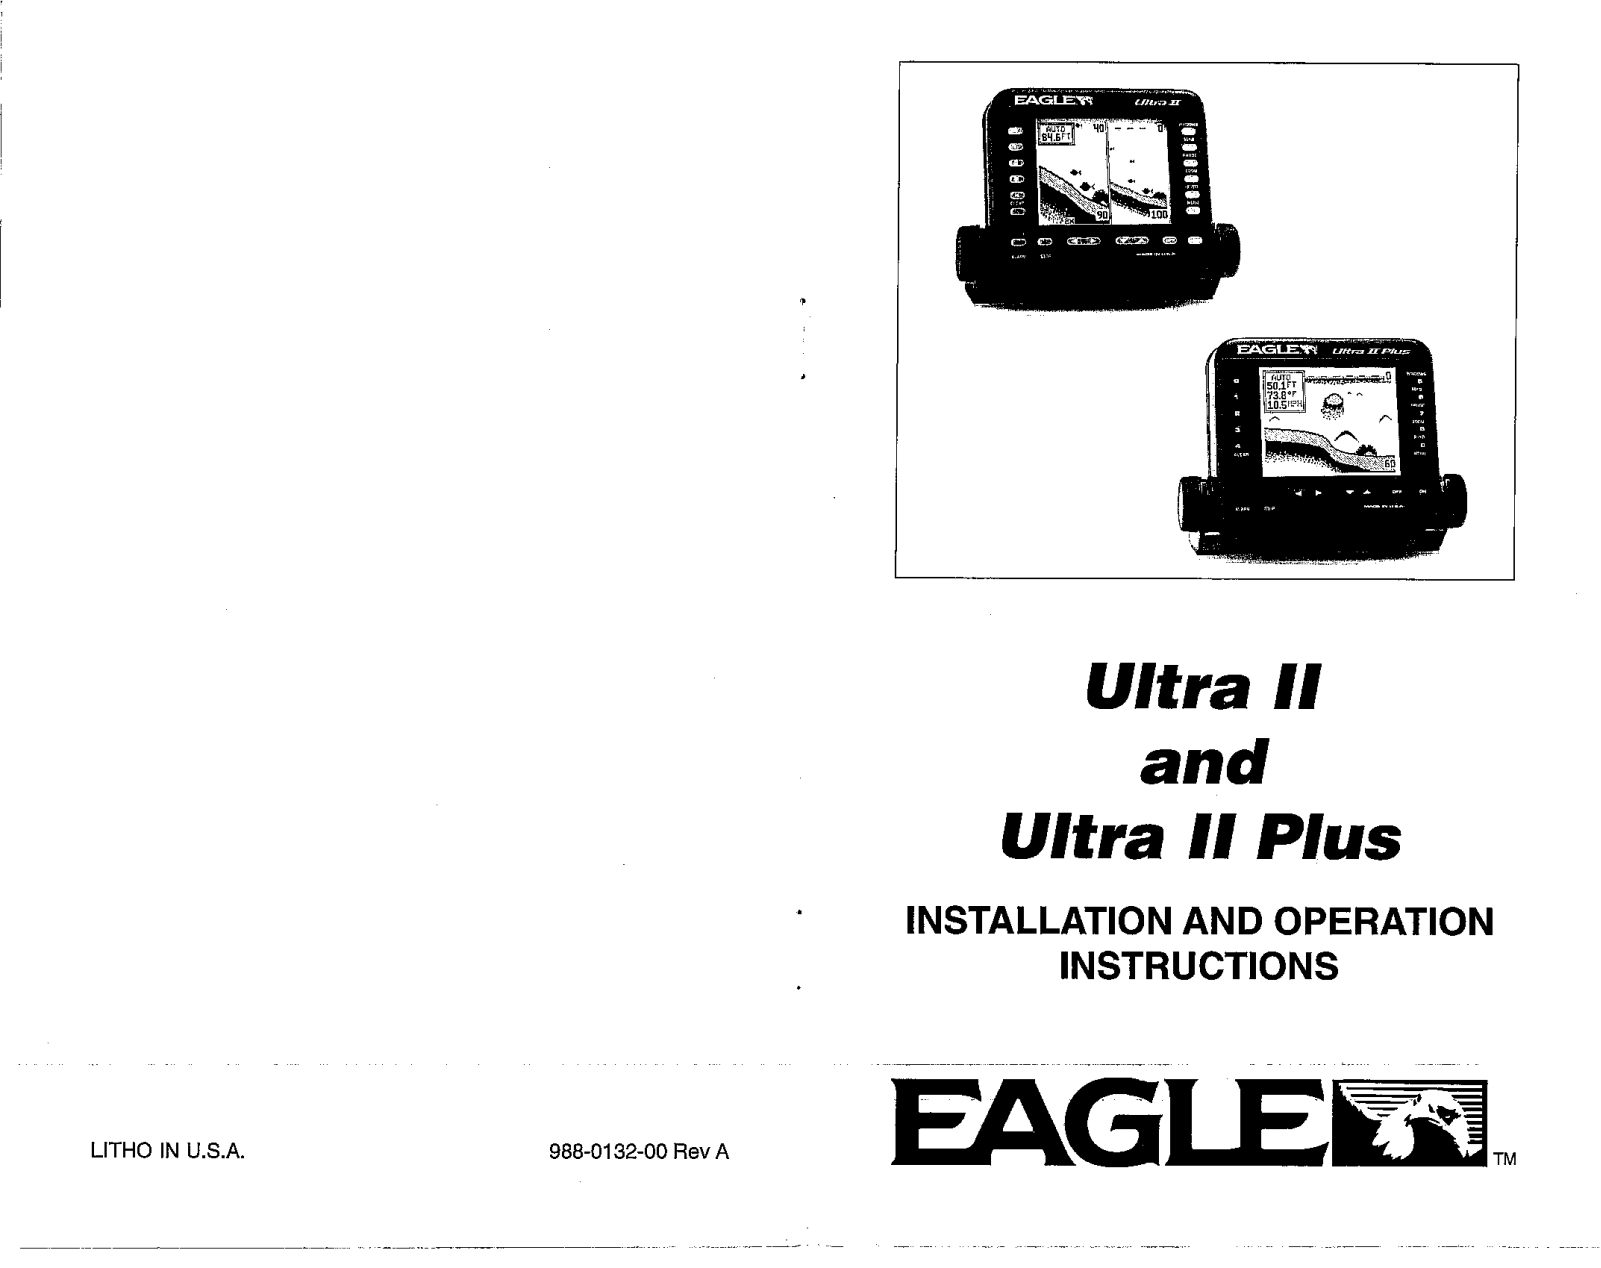 Eagle ULTRA II, ULTRA II PLUS INSTALLATION AND OPERATION INSTRUCTIONS